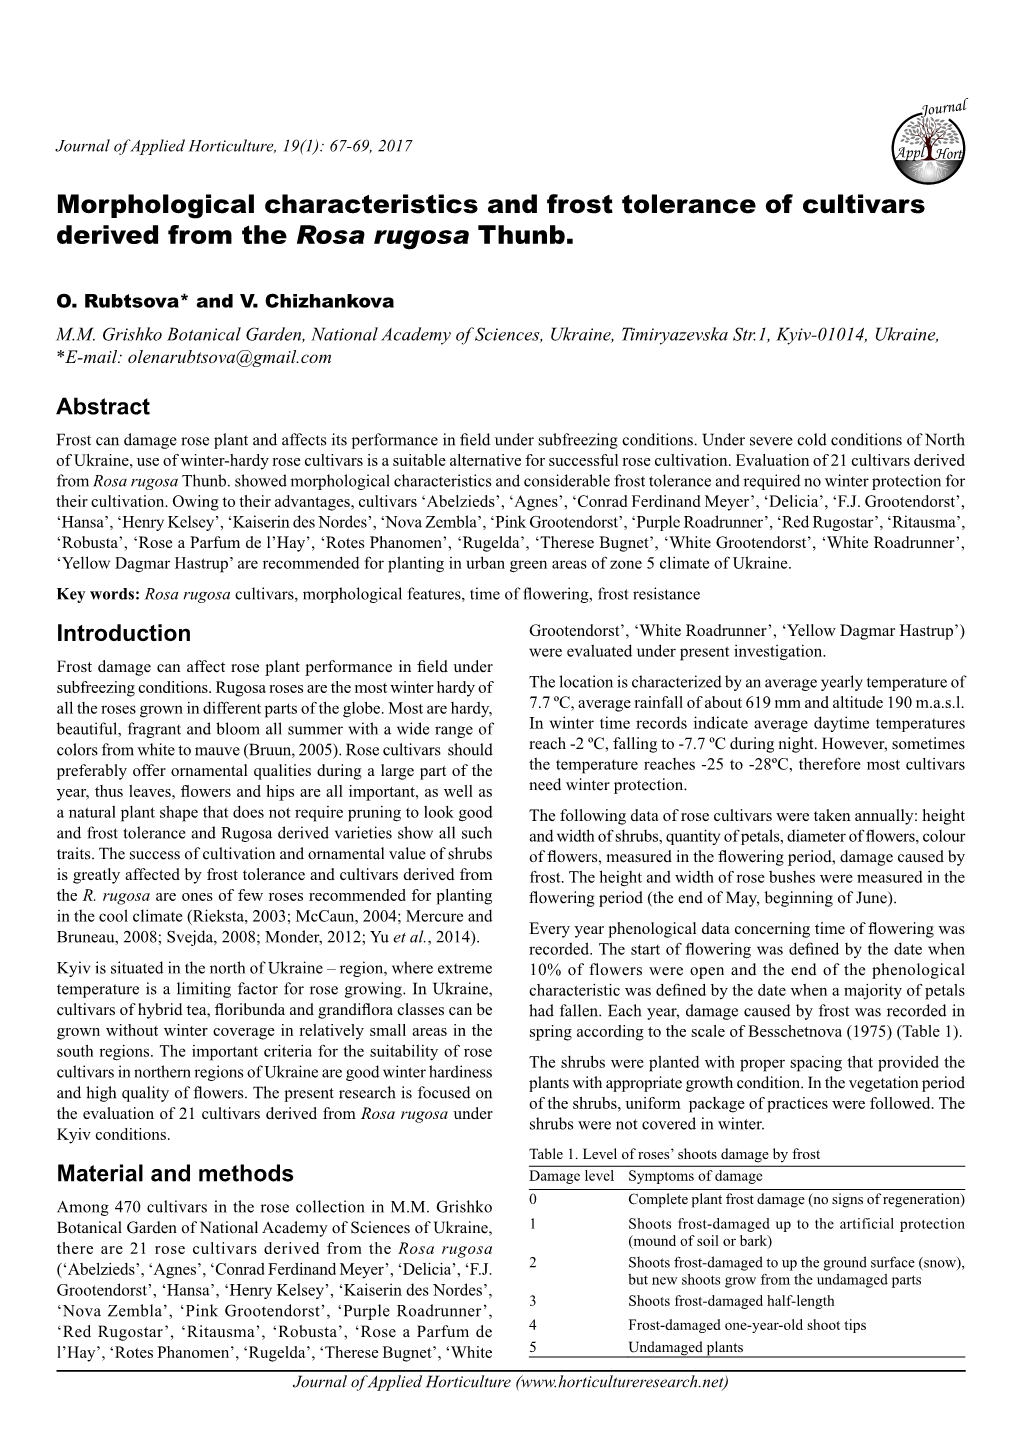 Morphological Characteristics and Frost Tolerance of Cultivars Derived from the Rosa Rugosa Thunb